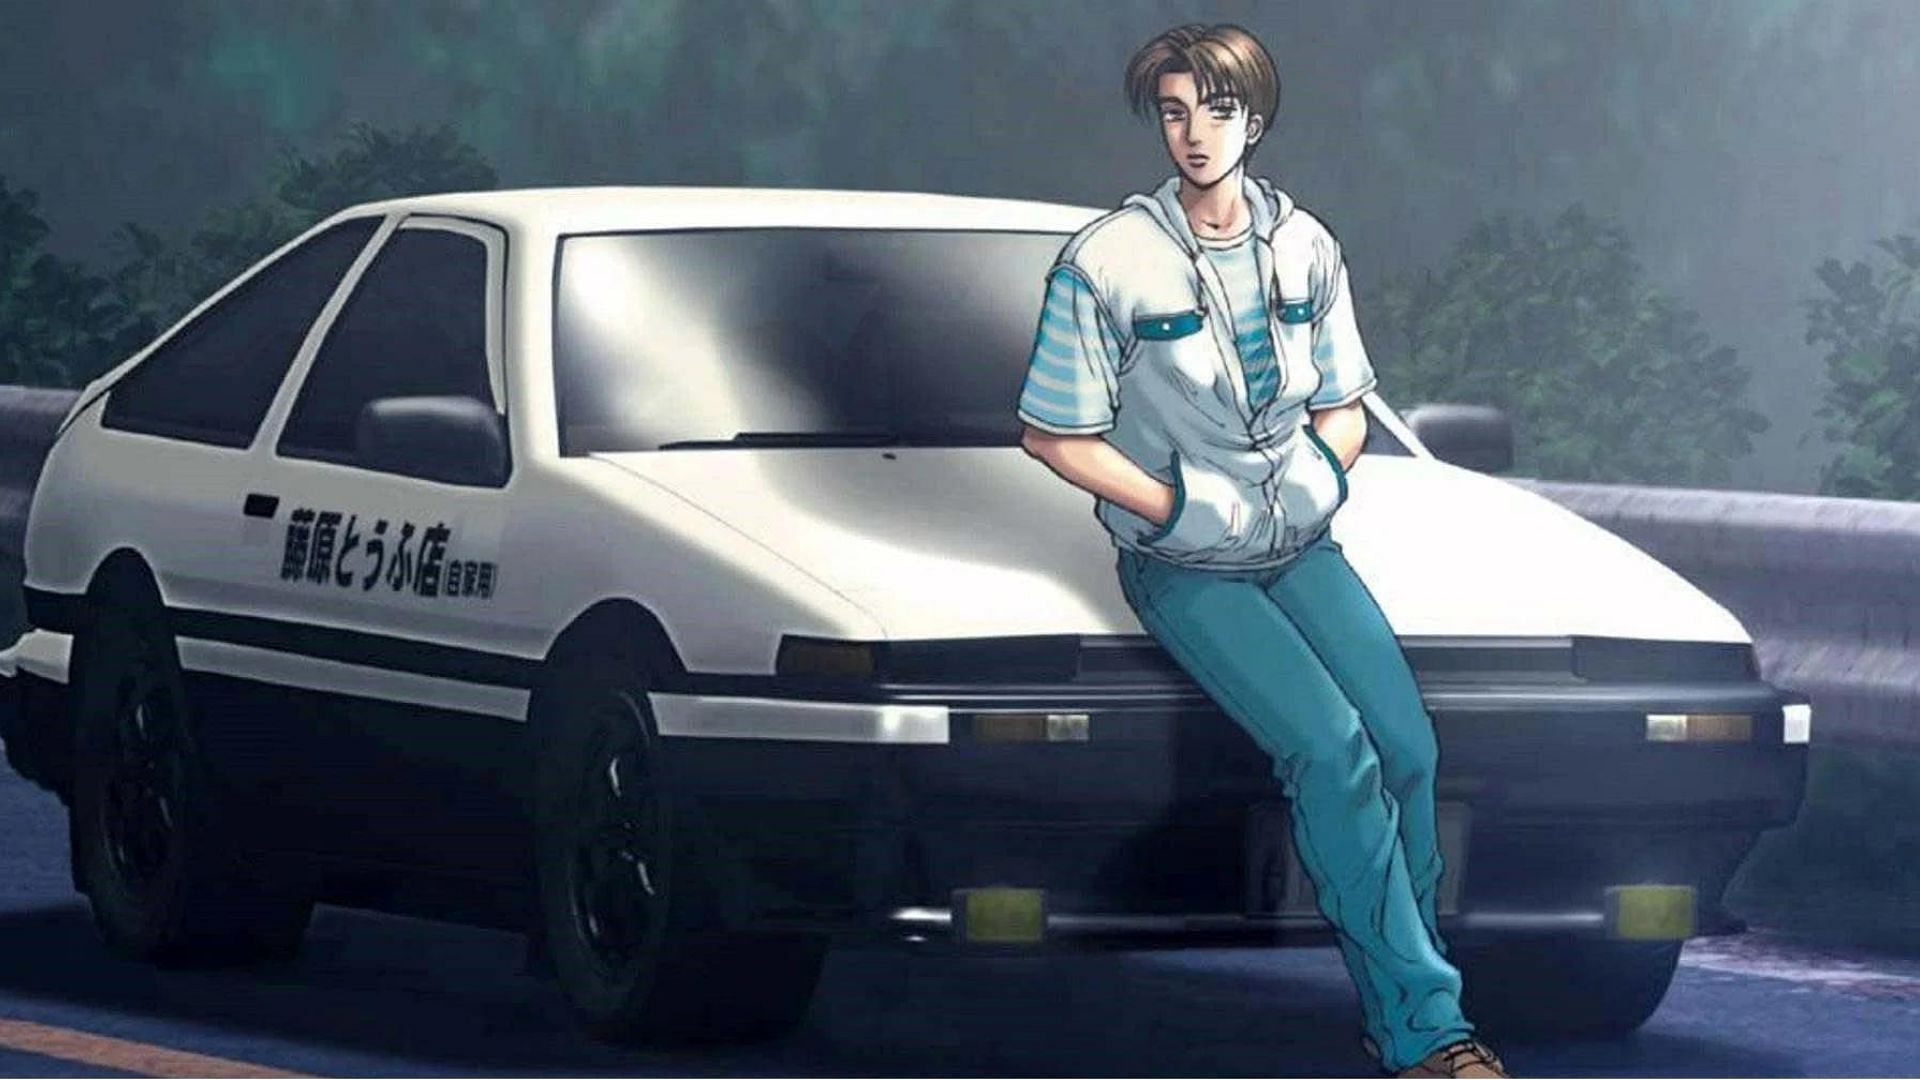 initial d wallpapers｜TikTok Search